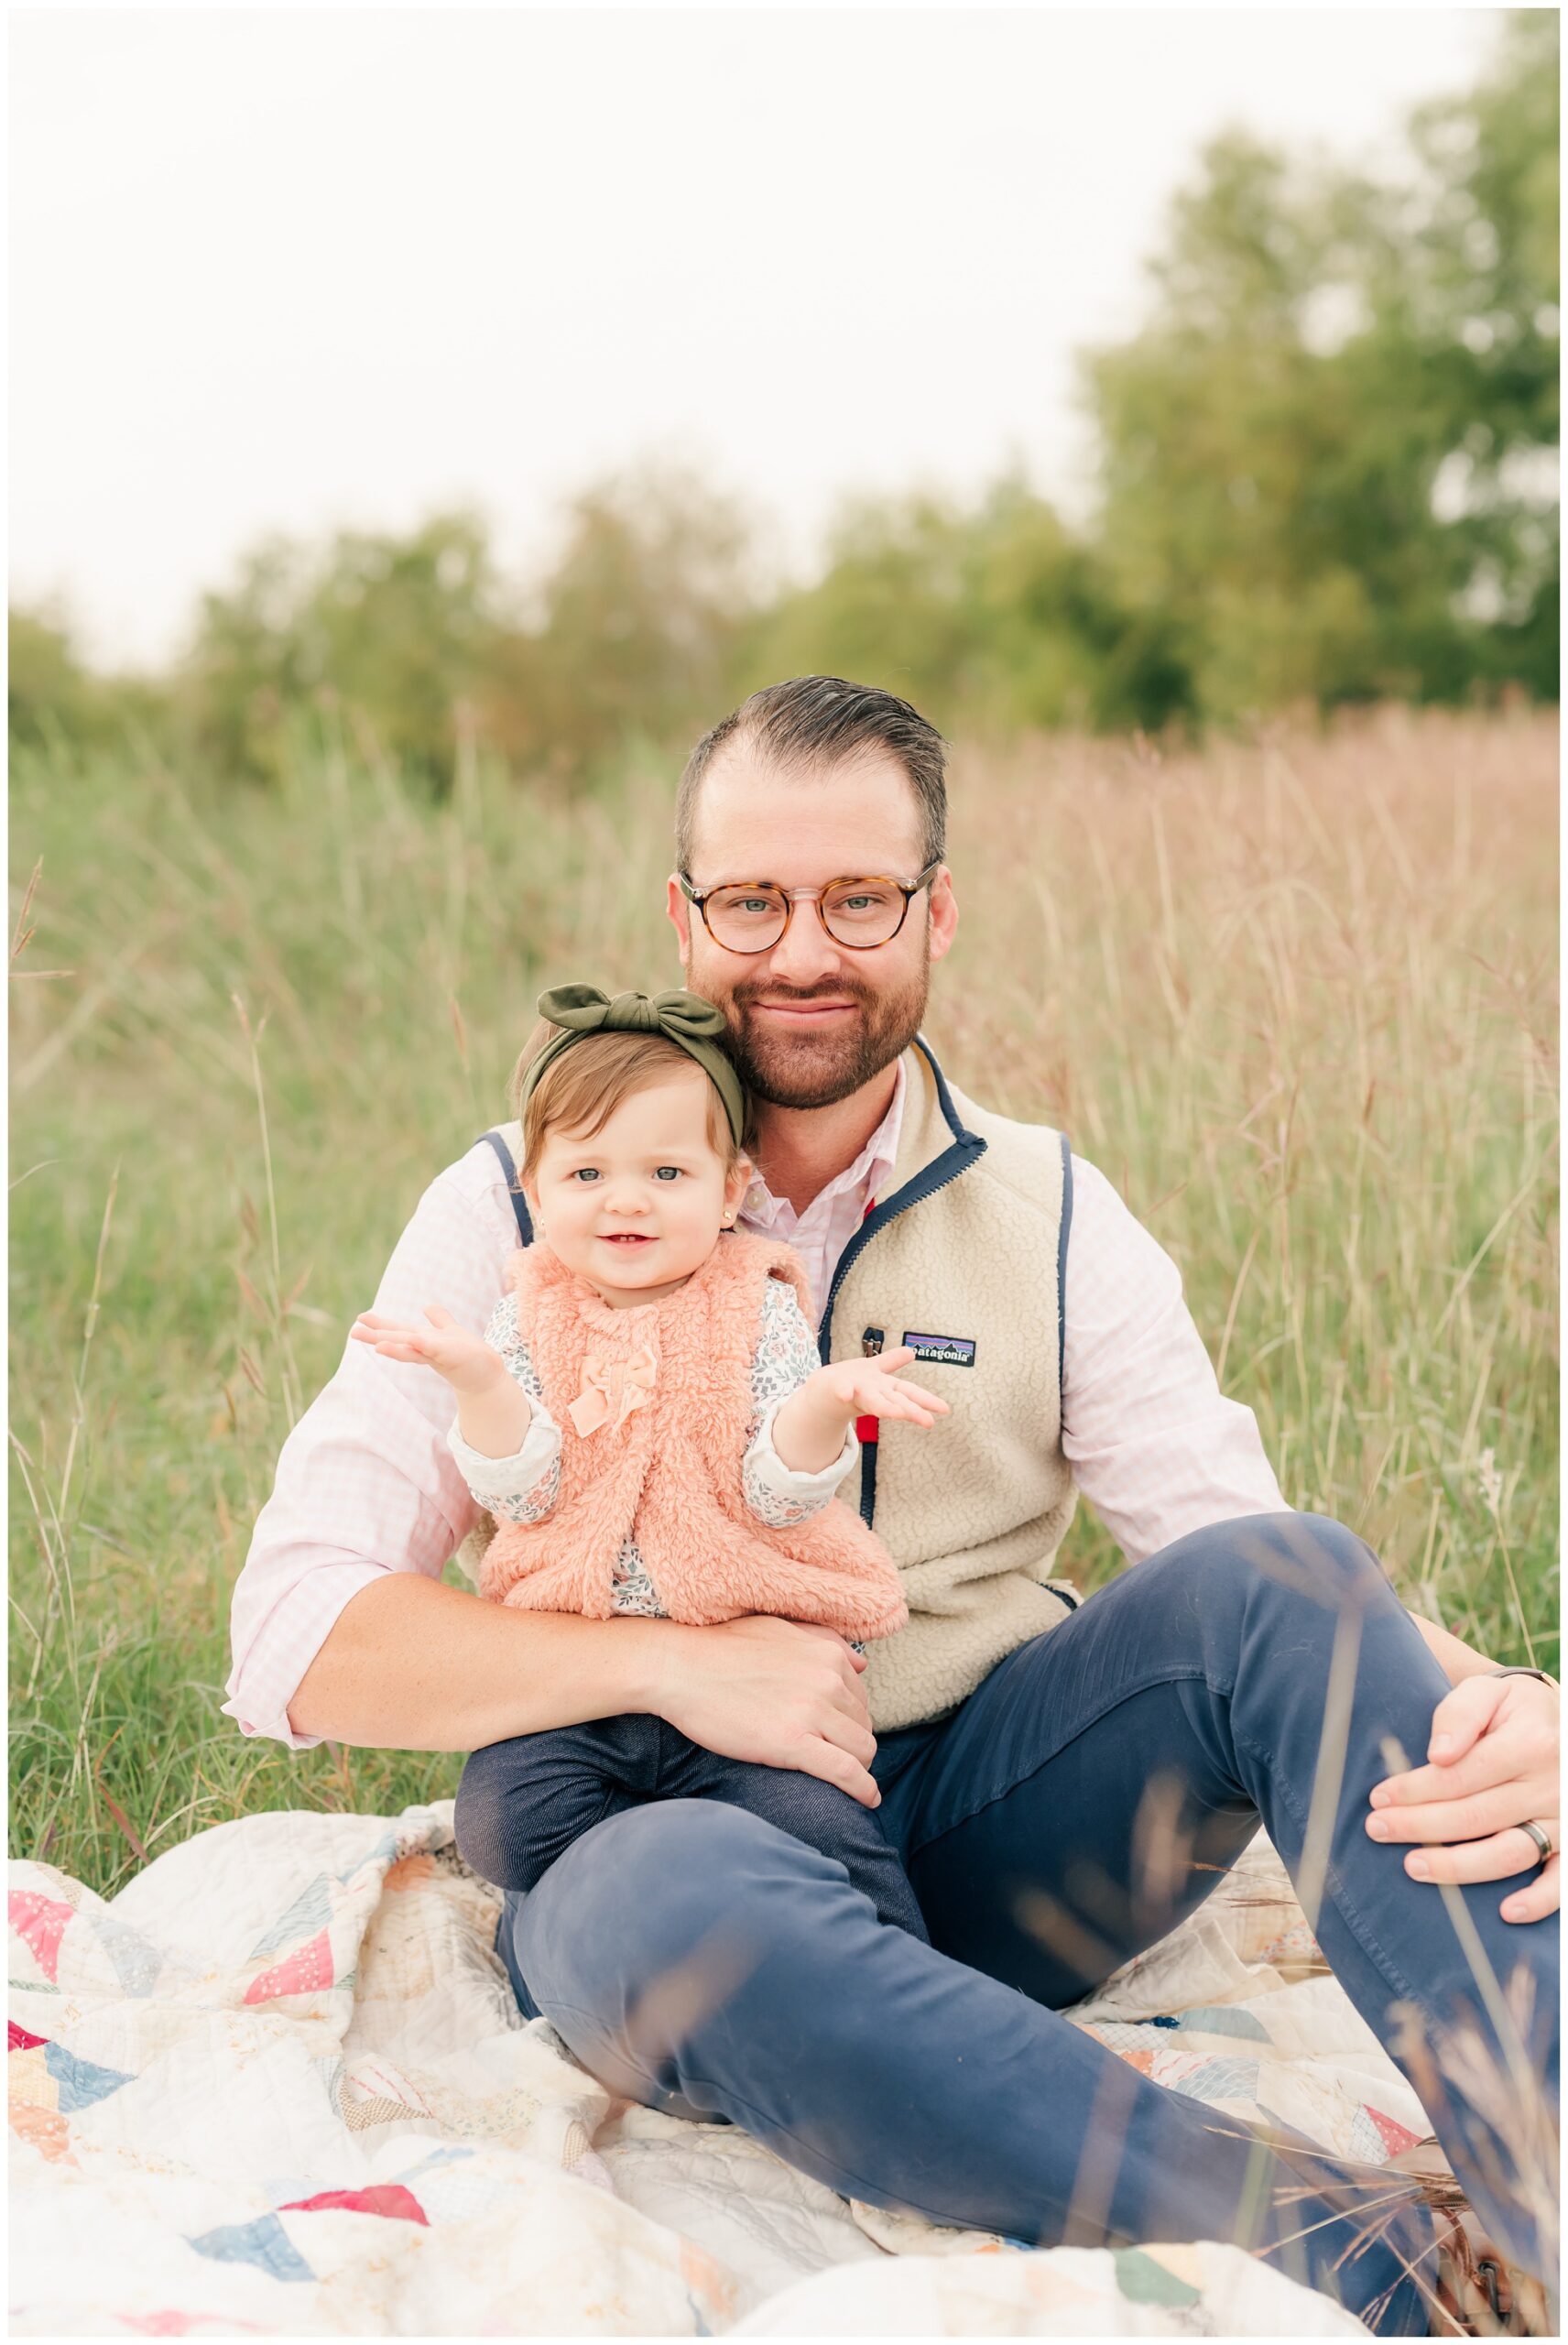 Outdoor Family photography in The Woodlands TX